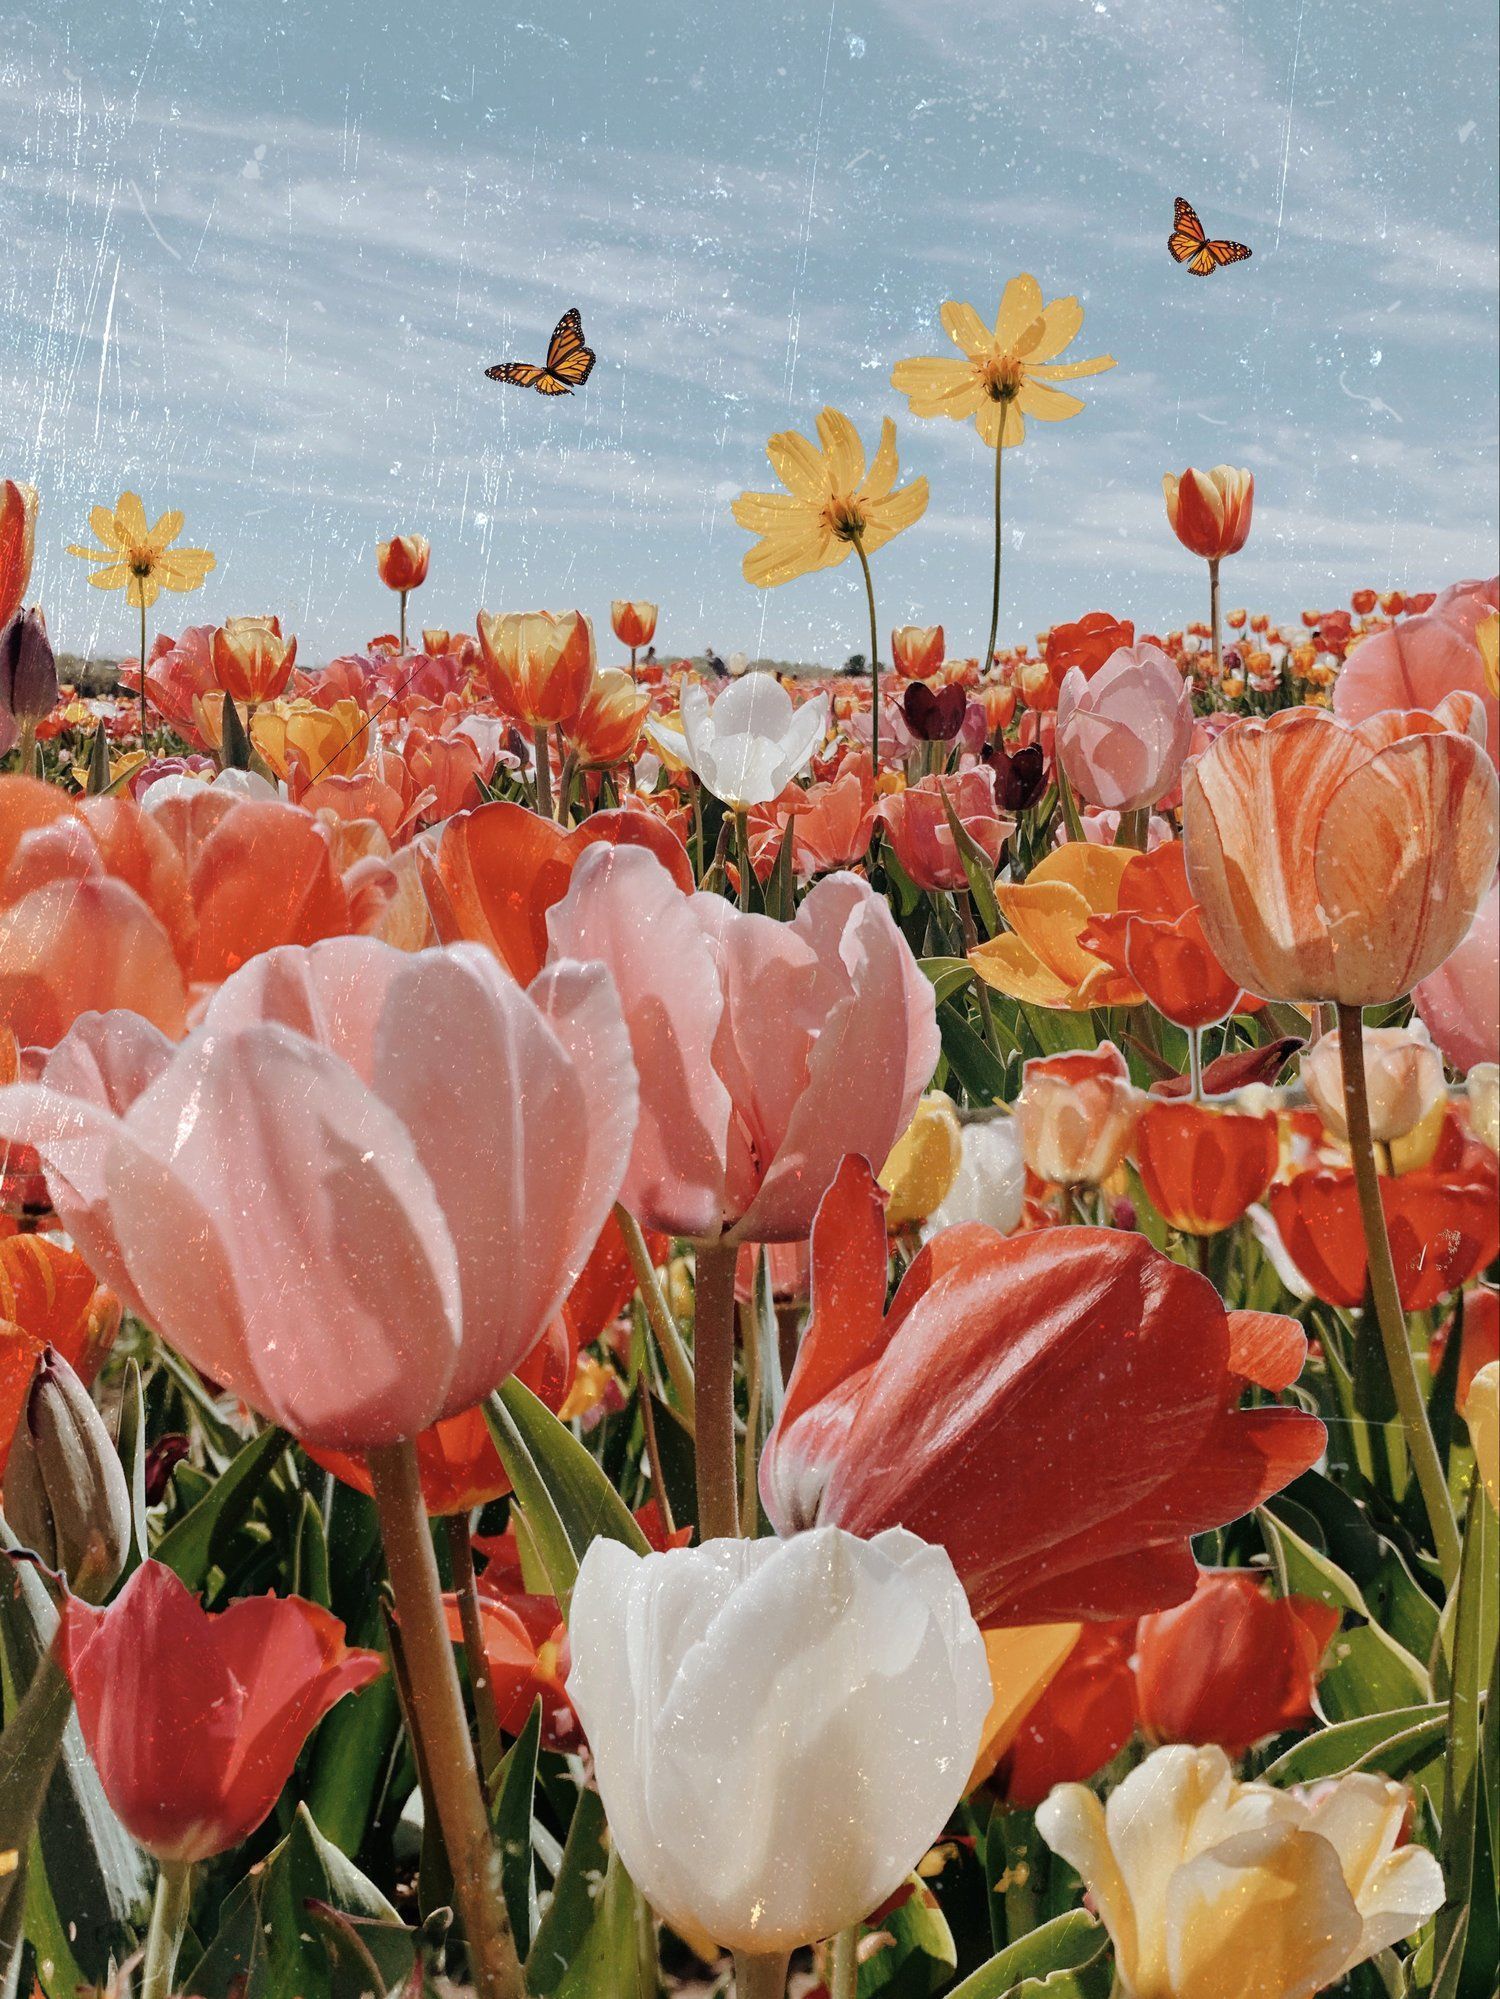 A field of flowers with a blue sky and butterflies - Tulip